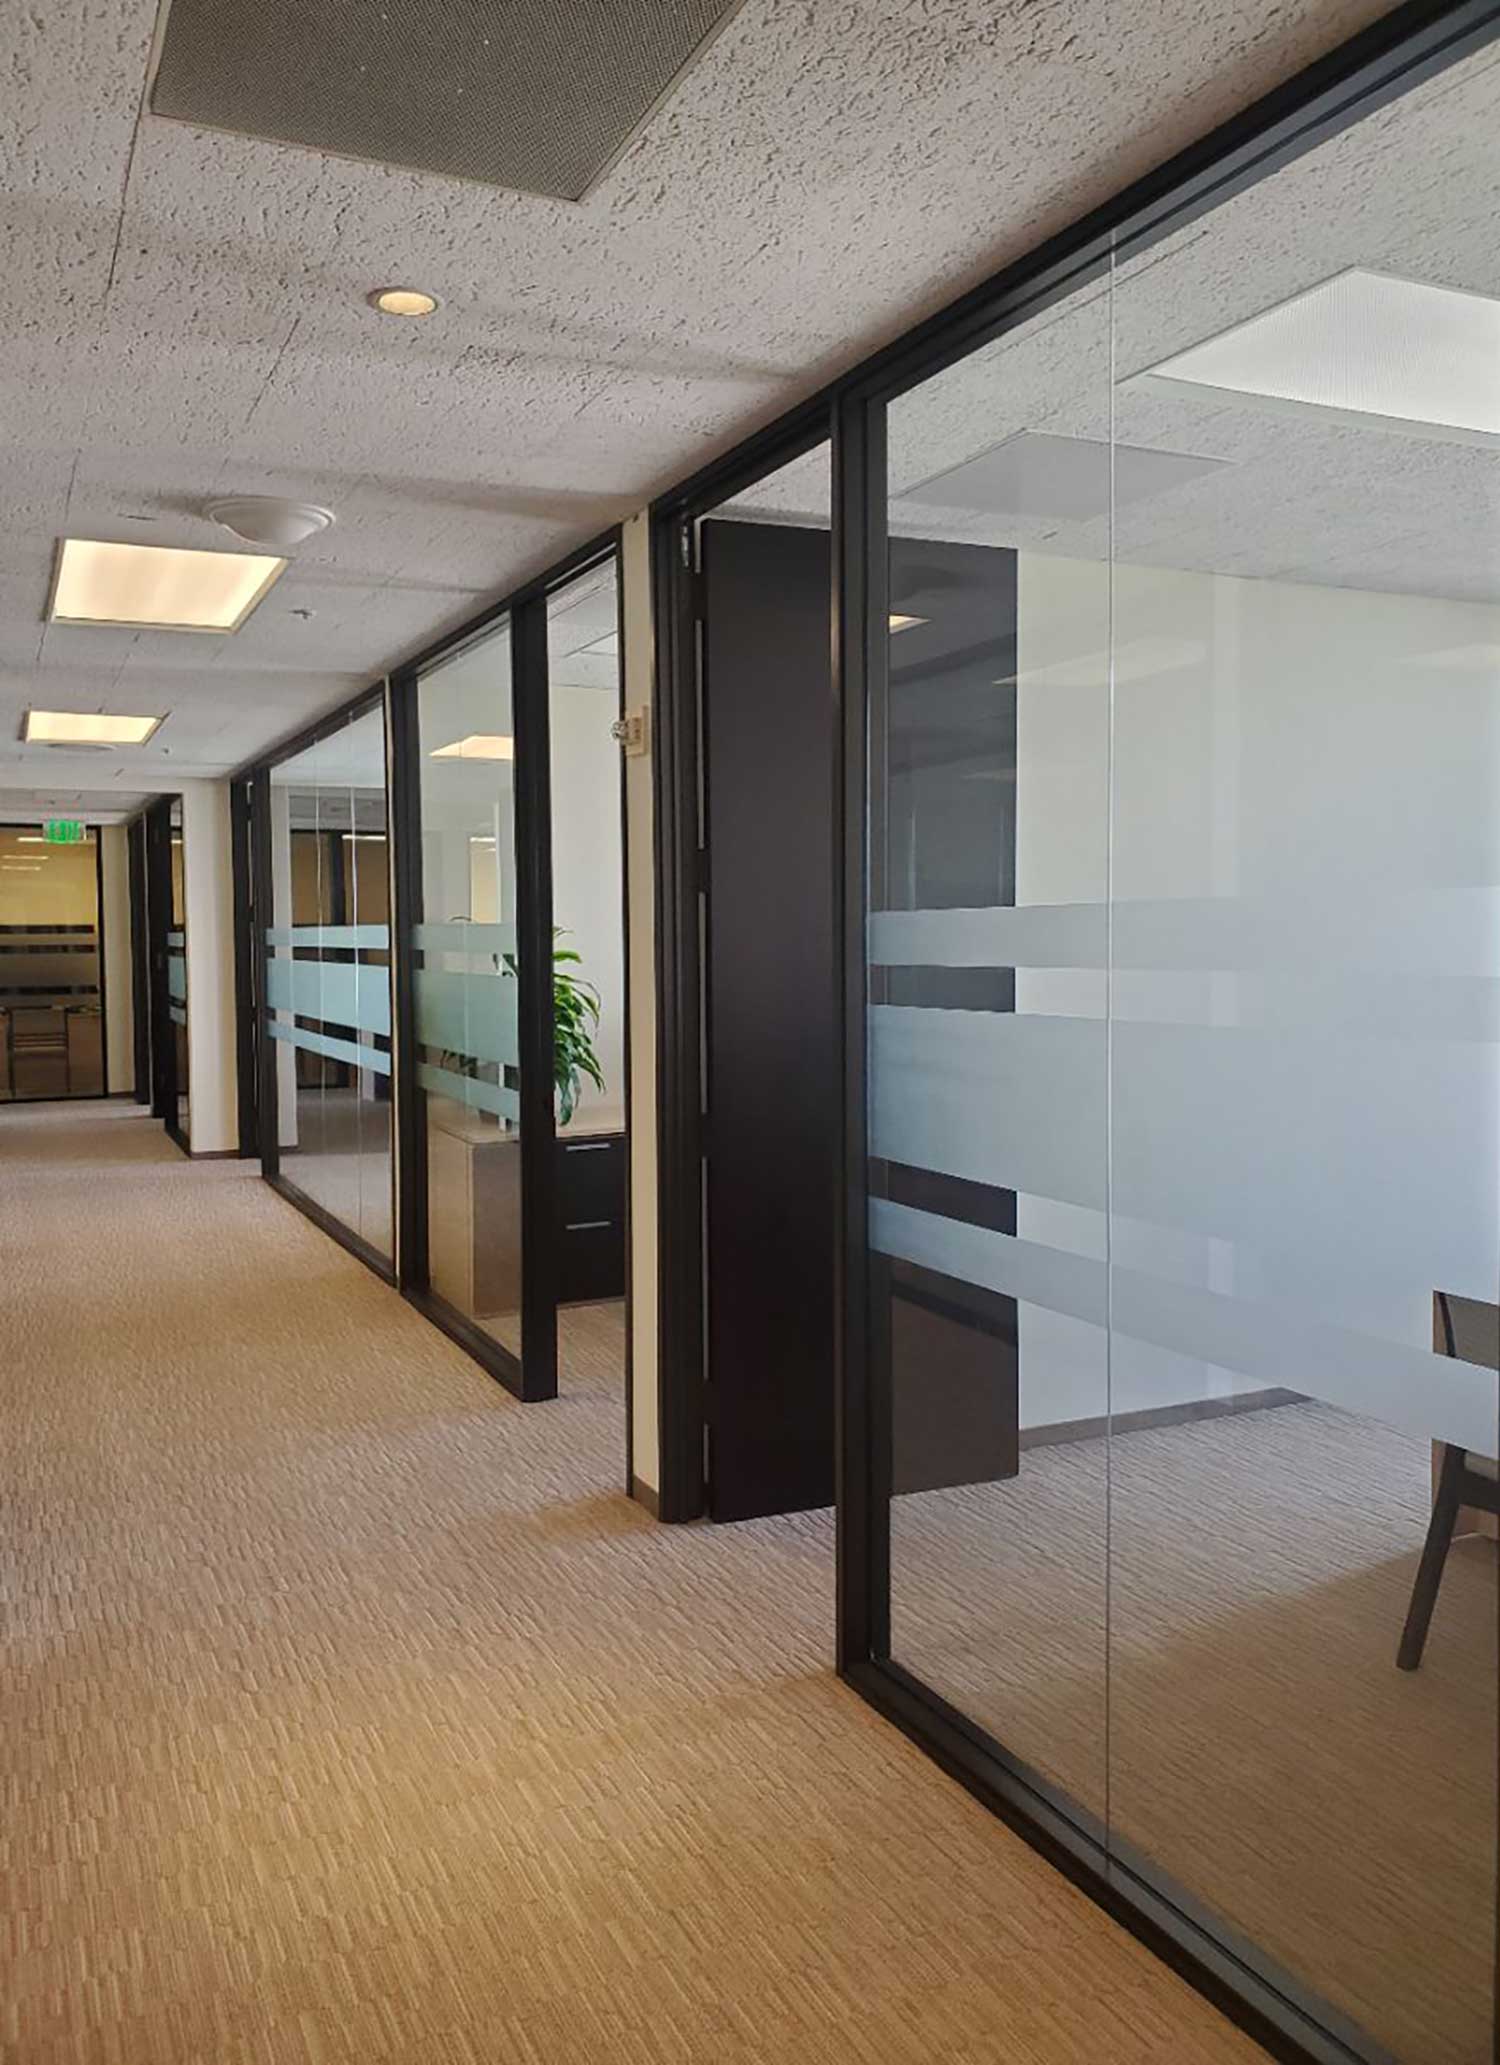 Decorative Commercial Window Film Project: Embarcadero, San Francisco by ClimatePro